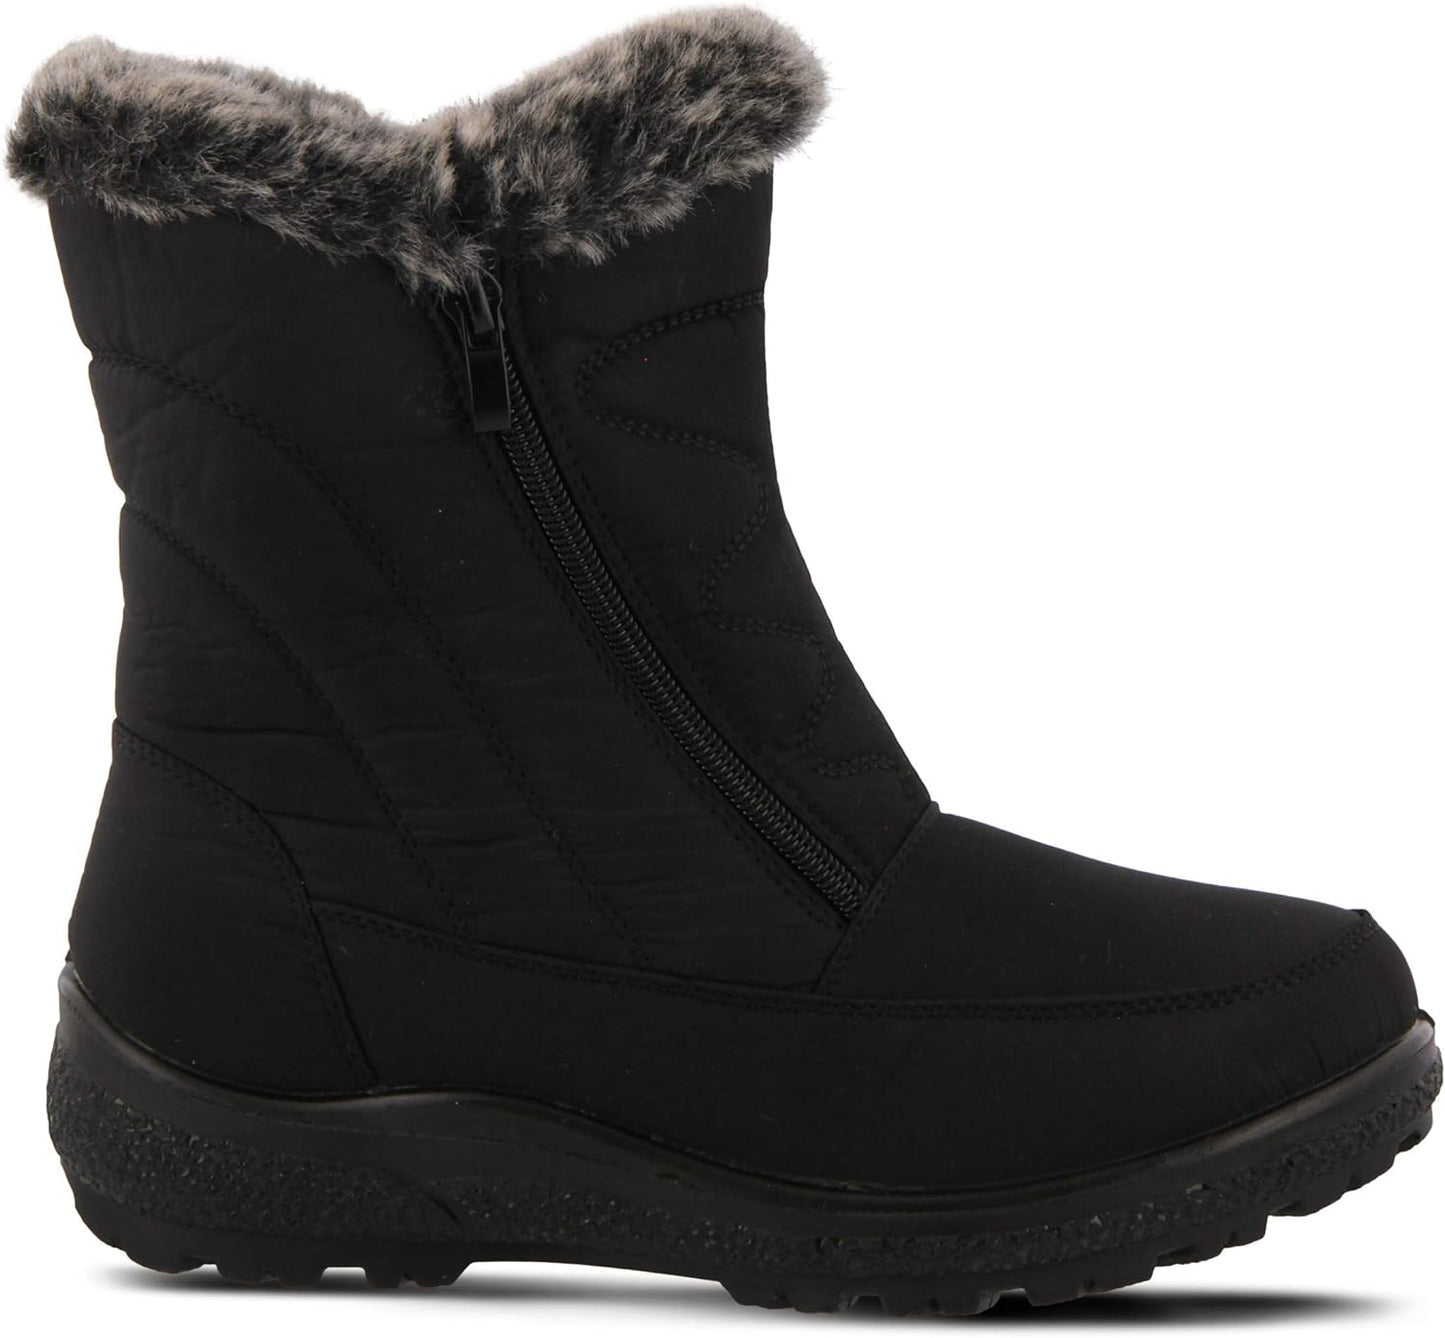 PERSENIA BLACK BOOT | Flexus Women's Persenia Snow Boot, Black at Brandy's Shoes Made in USA